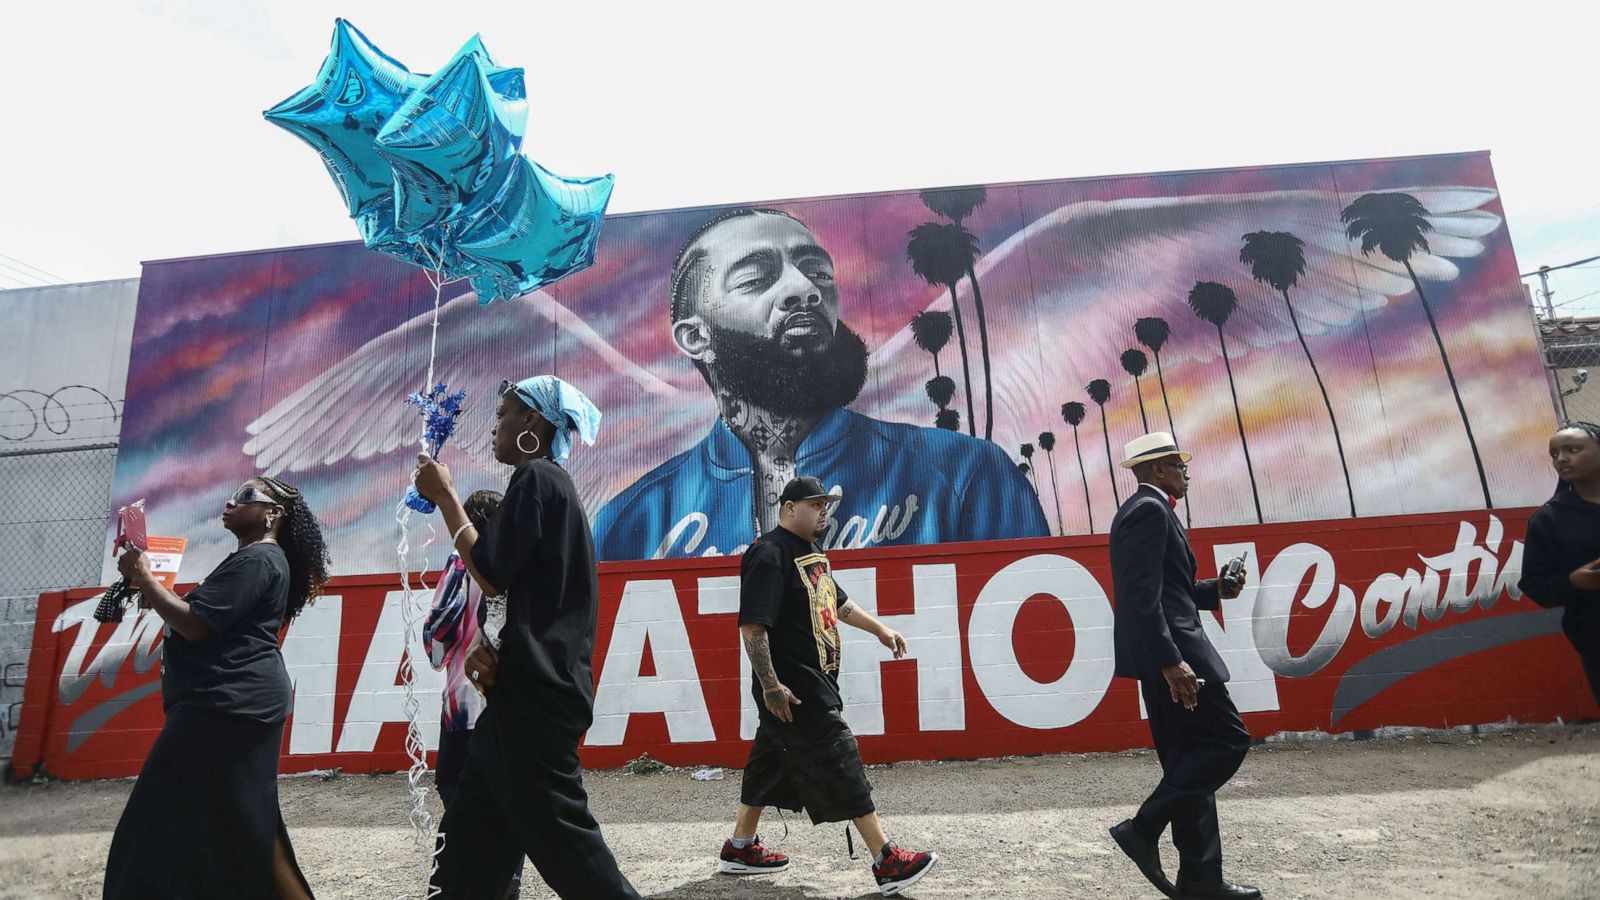 Thousands attend Nipsey Hussle's funeral at Staples Center in Los